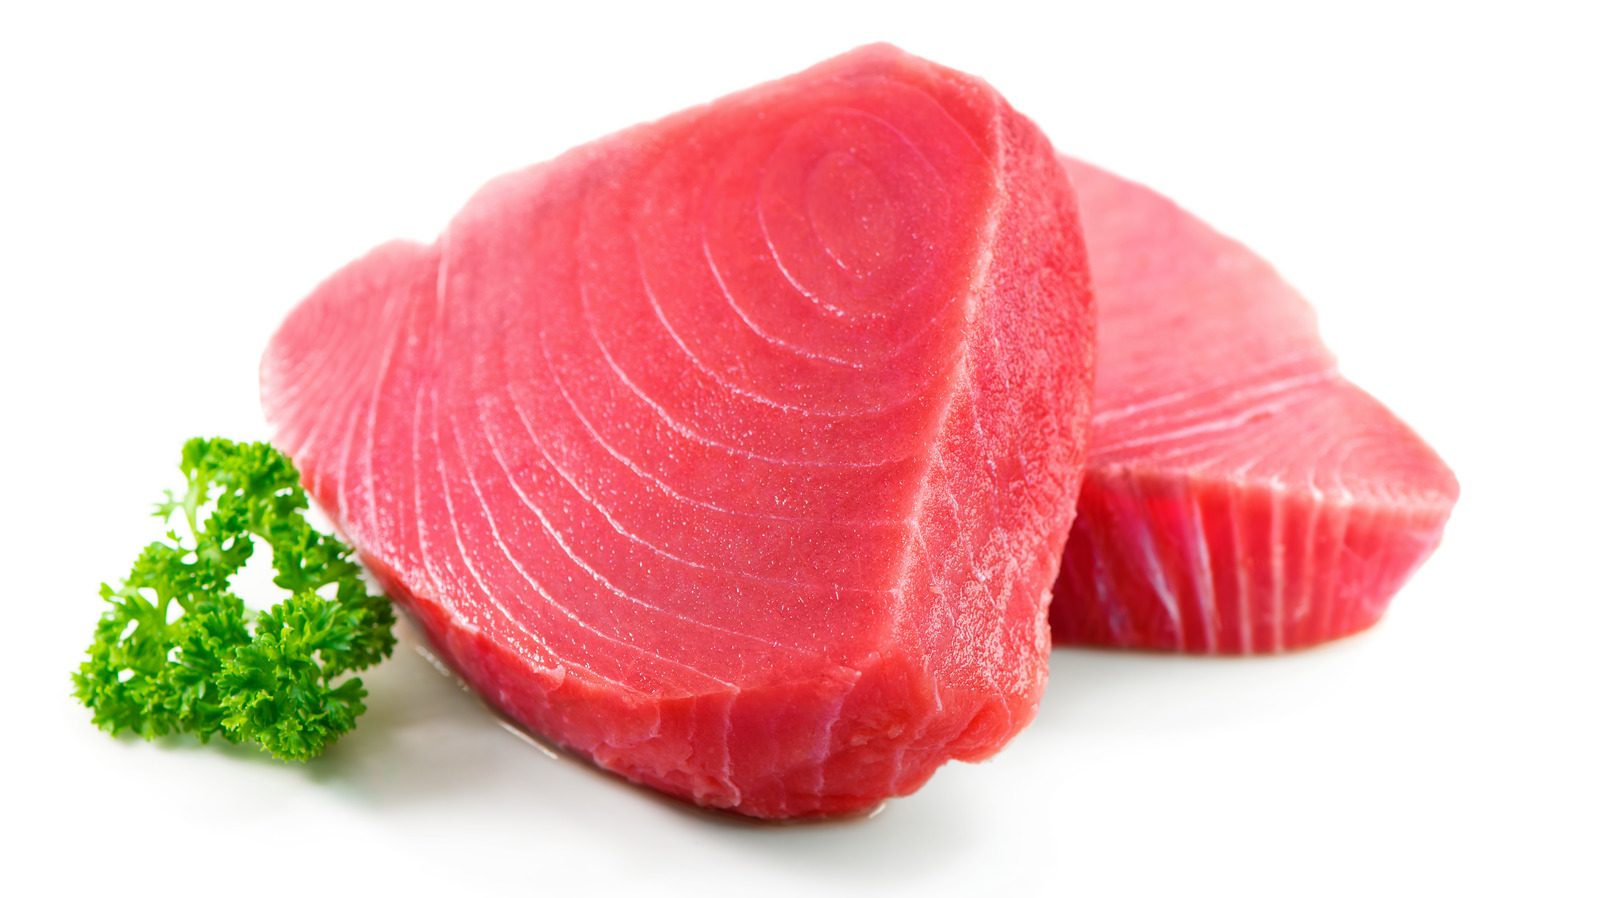 What You Need To Know Before Freezing Tuna